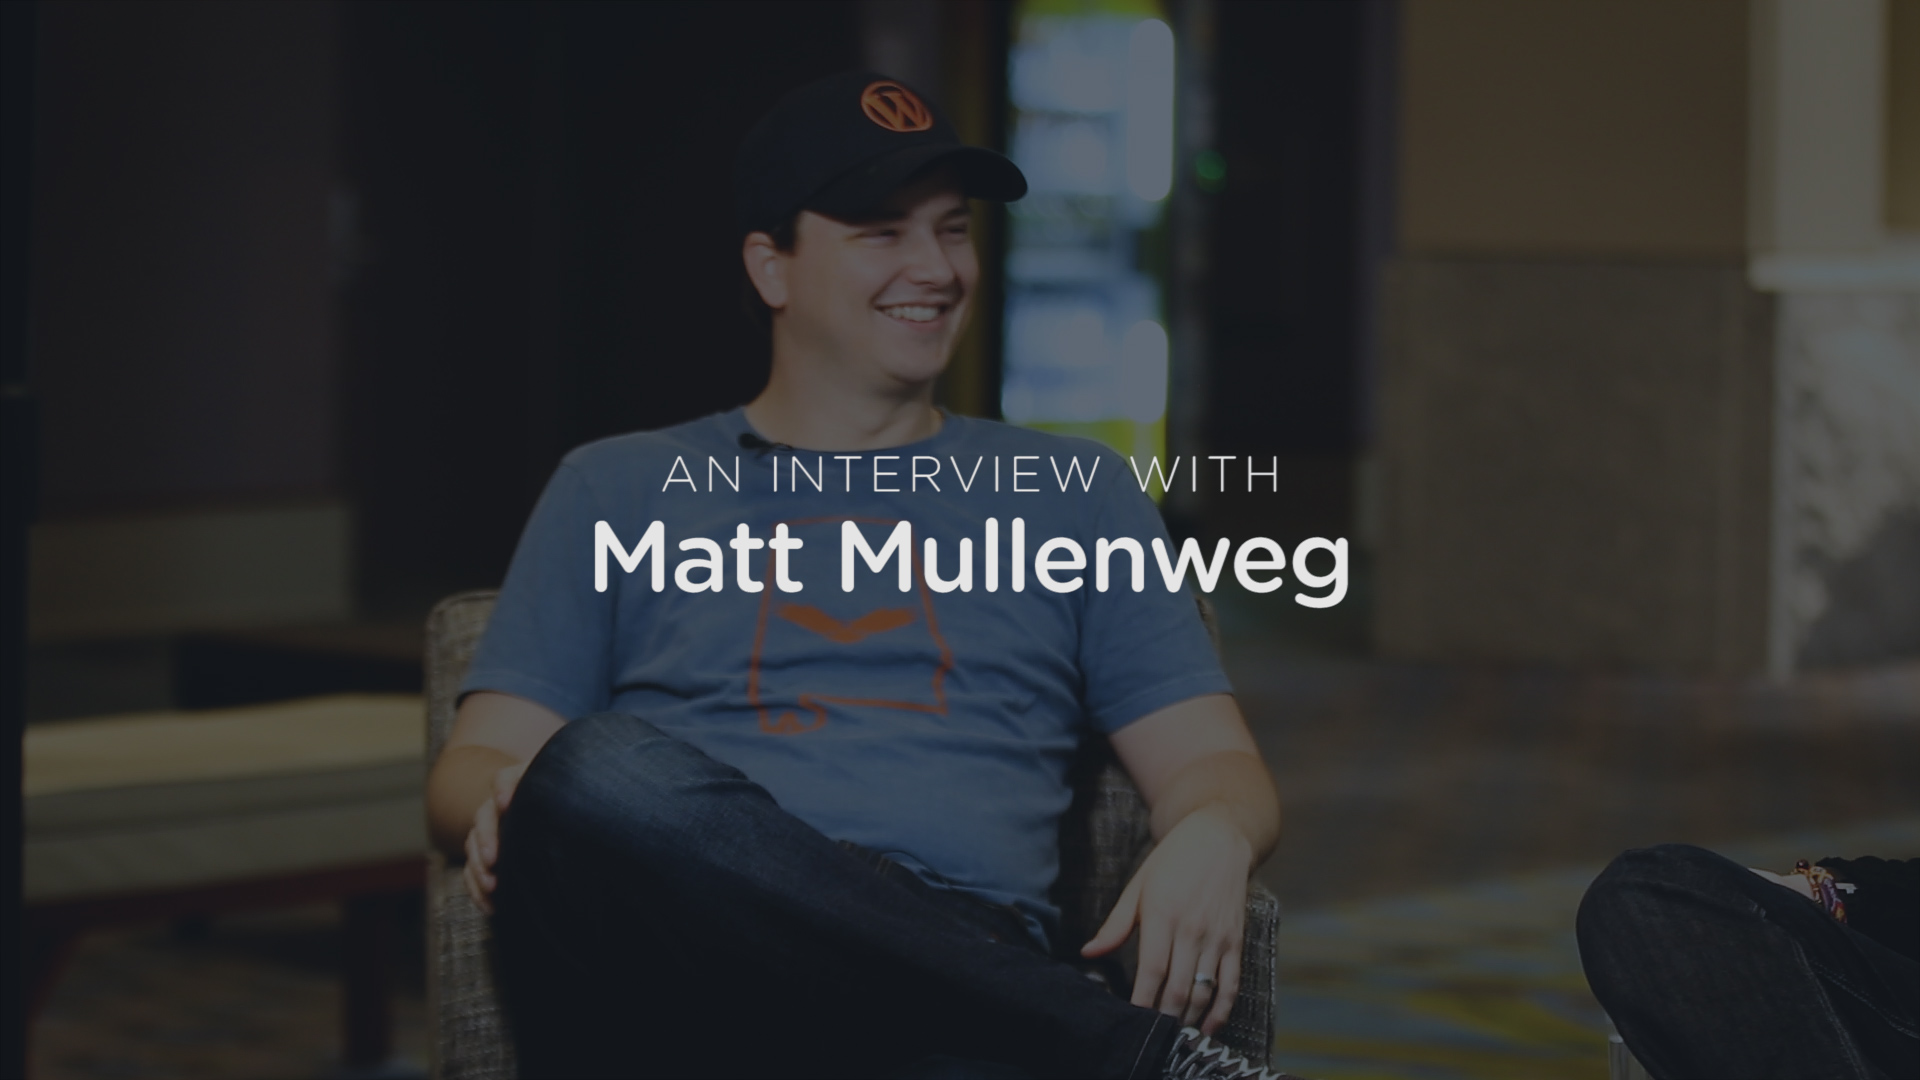 Interview with Matt Mullenweg on the new WordPress release cycle and more